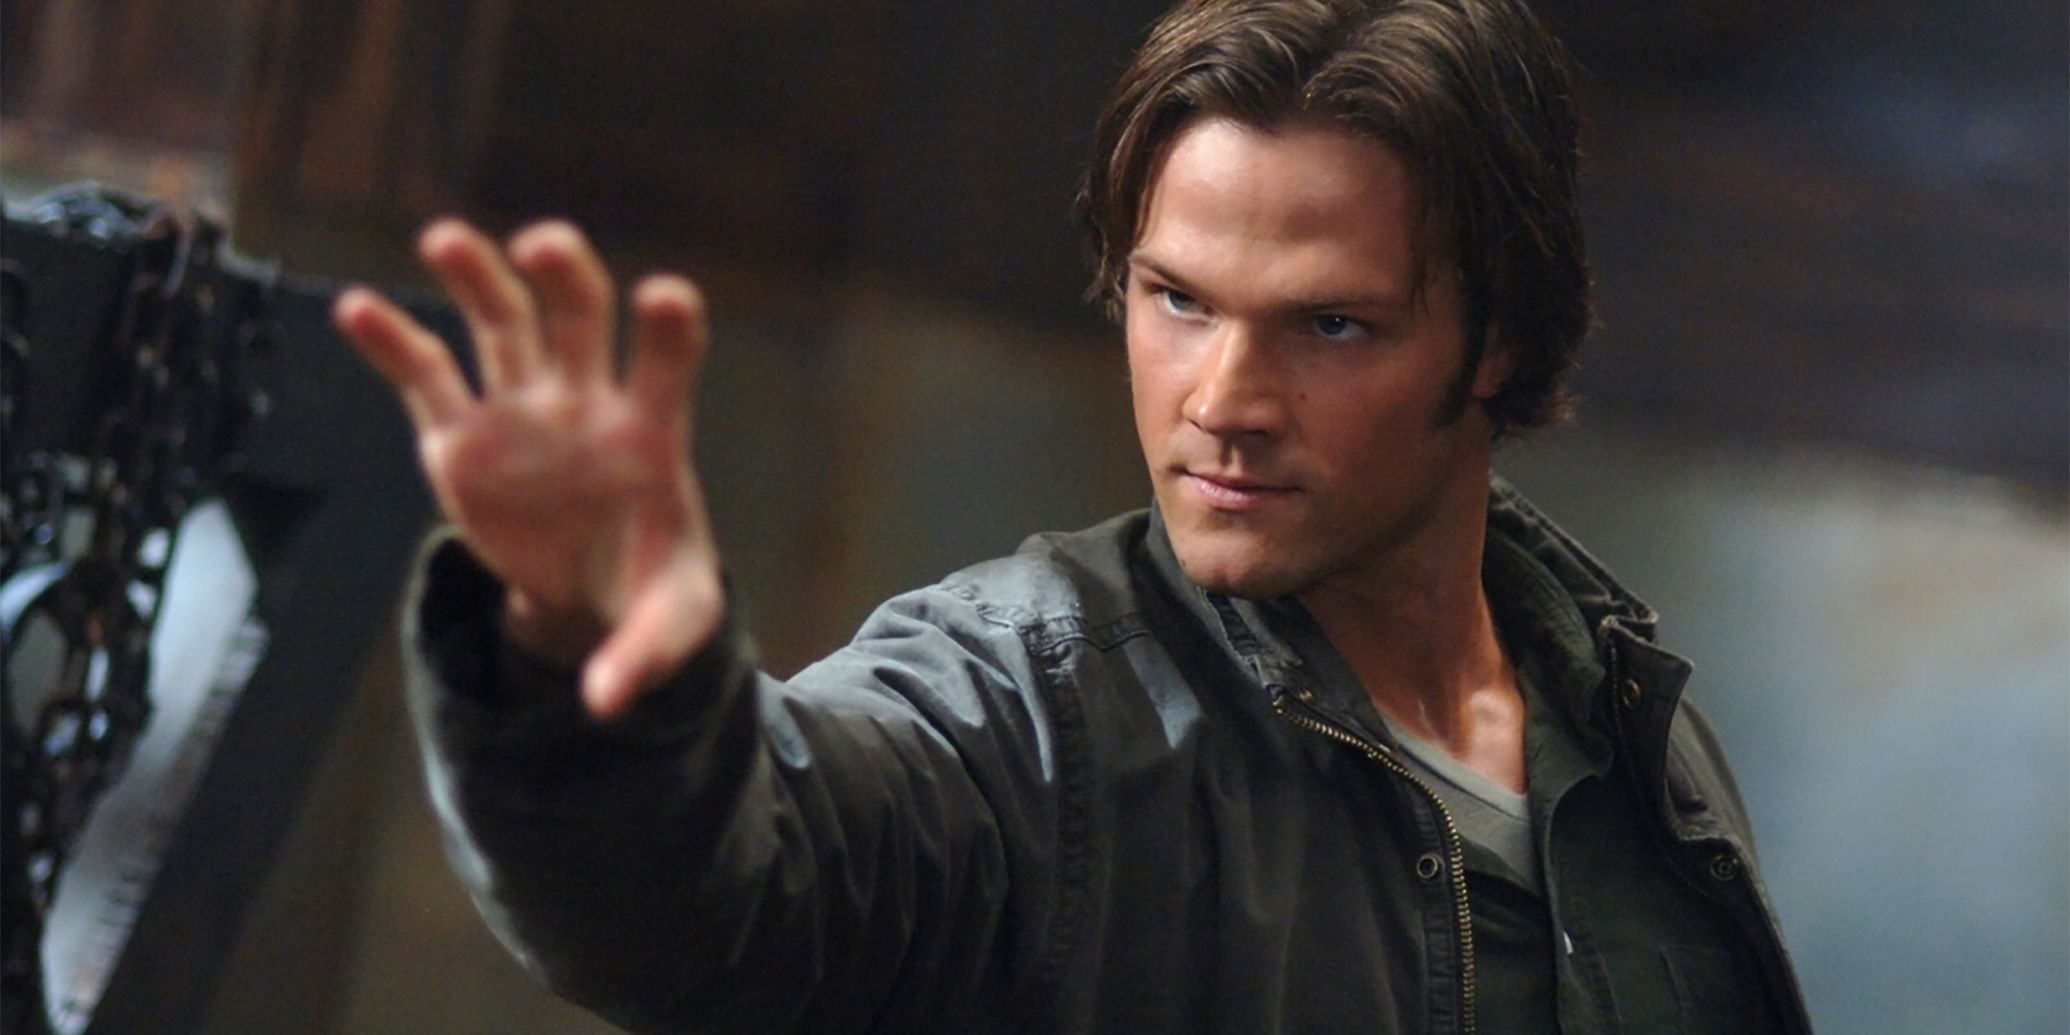 Sam Winchester uses his powers in Supernatural